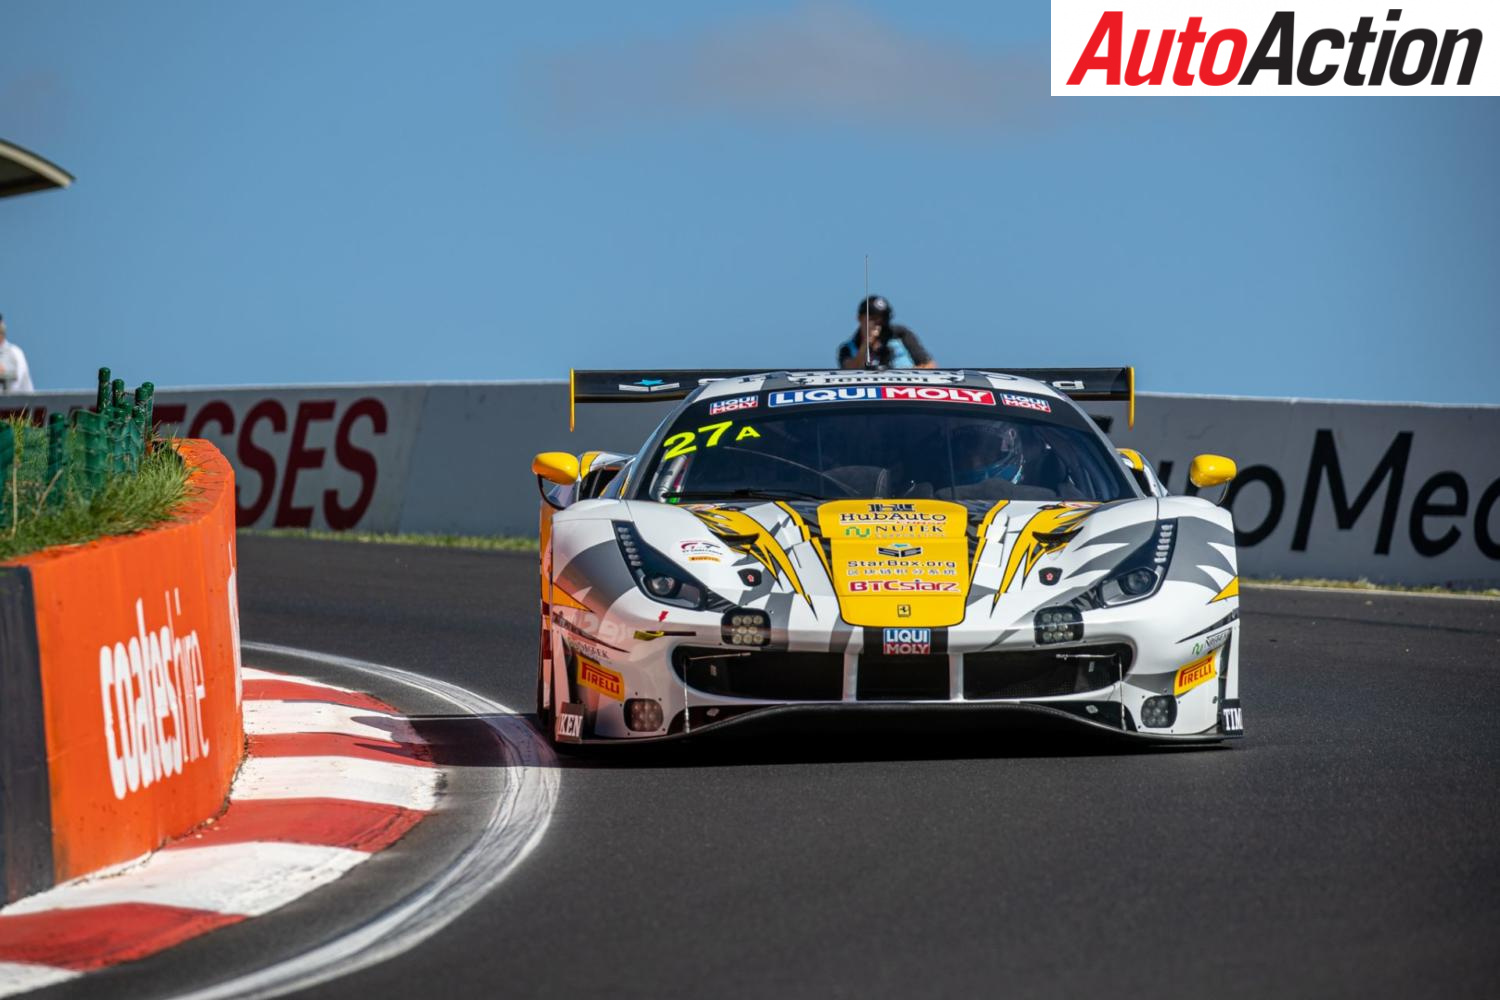 Ninth brand enters Intercontinental GT Challenge - Photo: InSyde Media